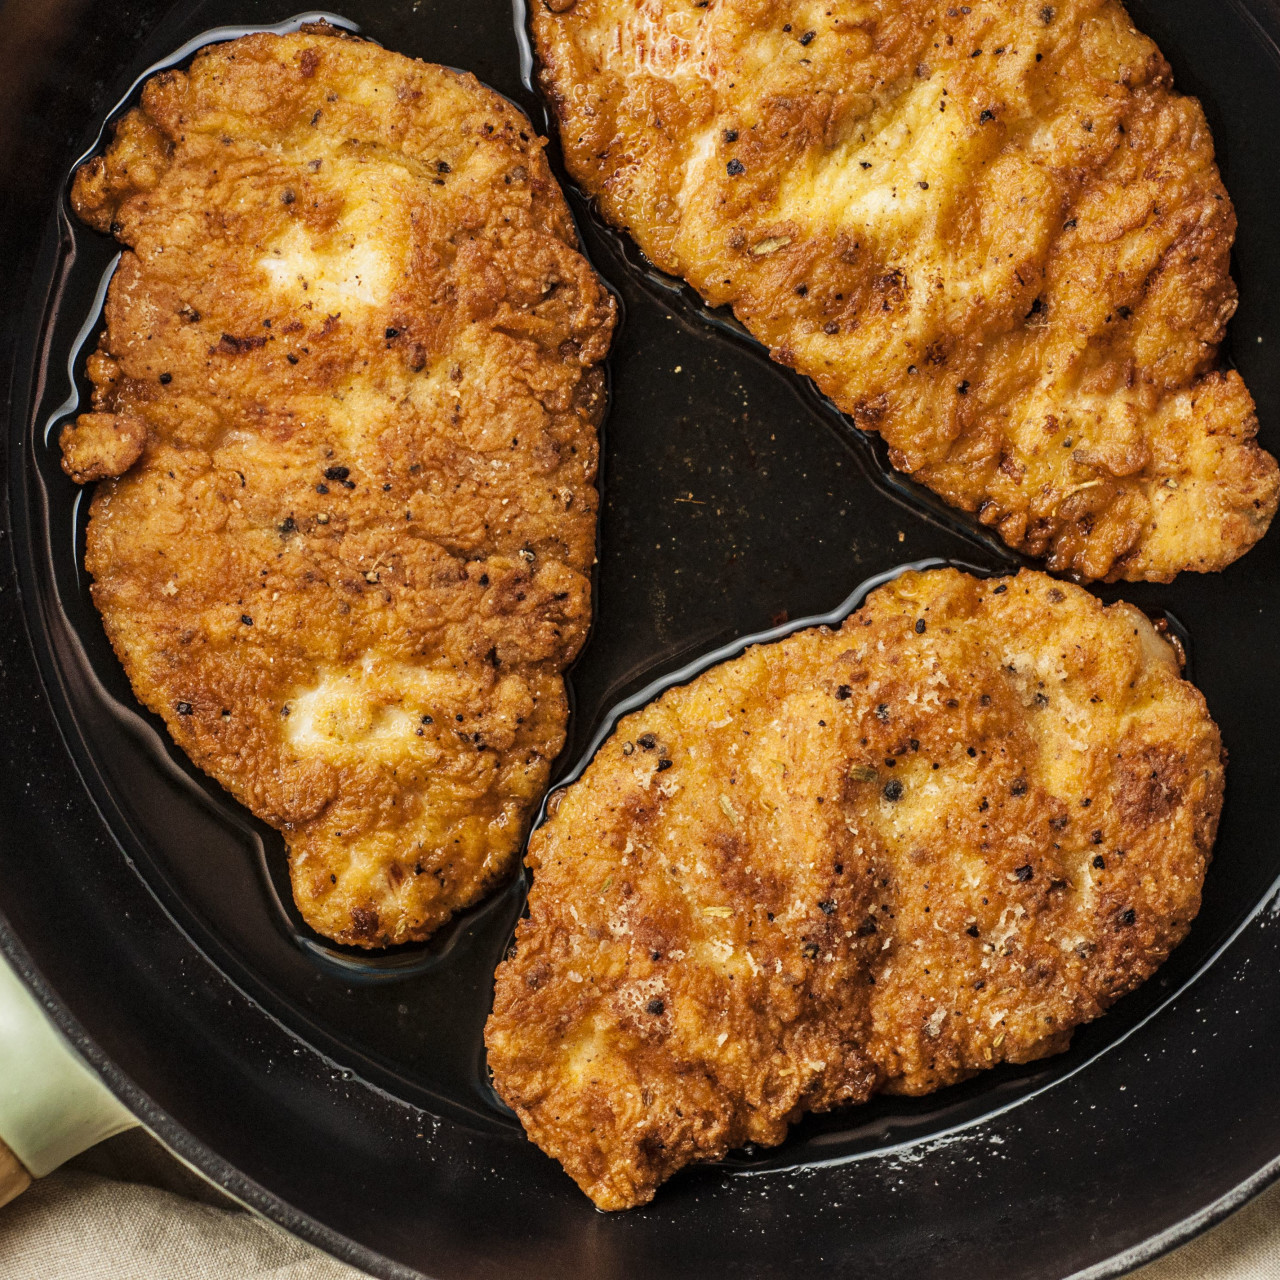 https://bigoven-res.cloudinary.com/image/upload/t_recipe-1280/pan-fried-chicken-breasts-35c19b.jpg